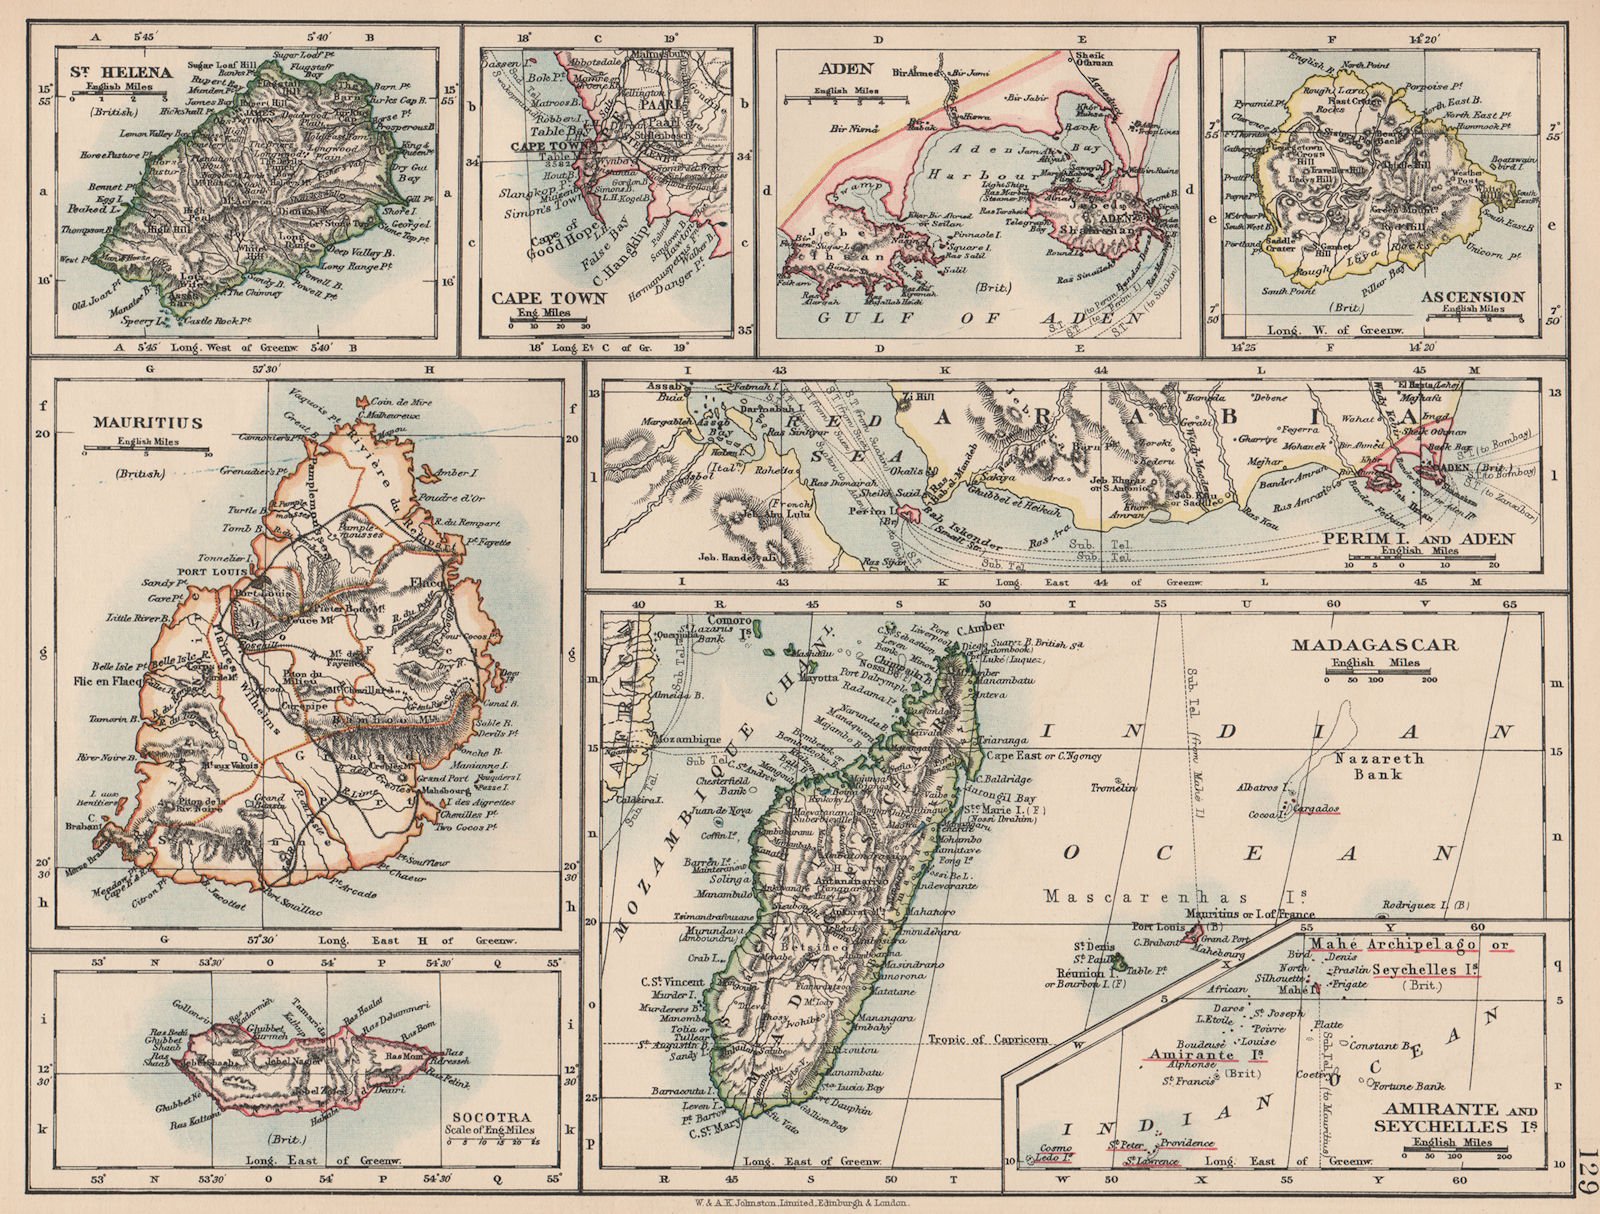 AFRICAN ISLANDS & CITIES. Madagascar Mauritius Ascension St Helena 1906 map